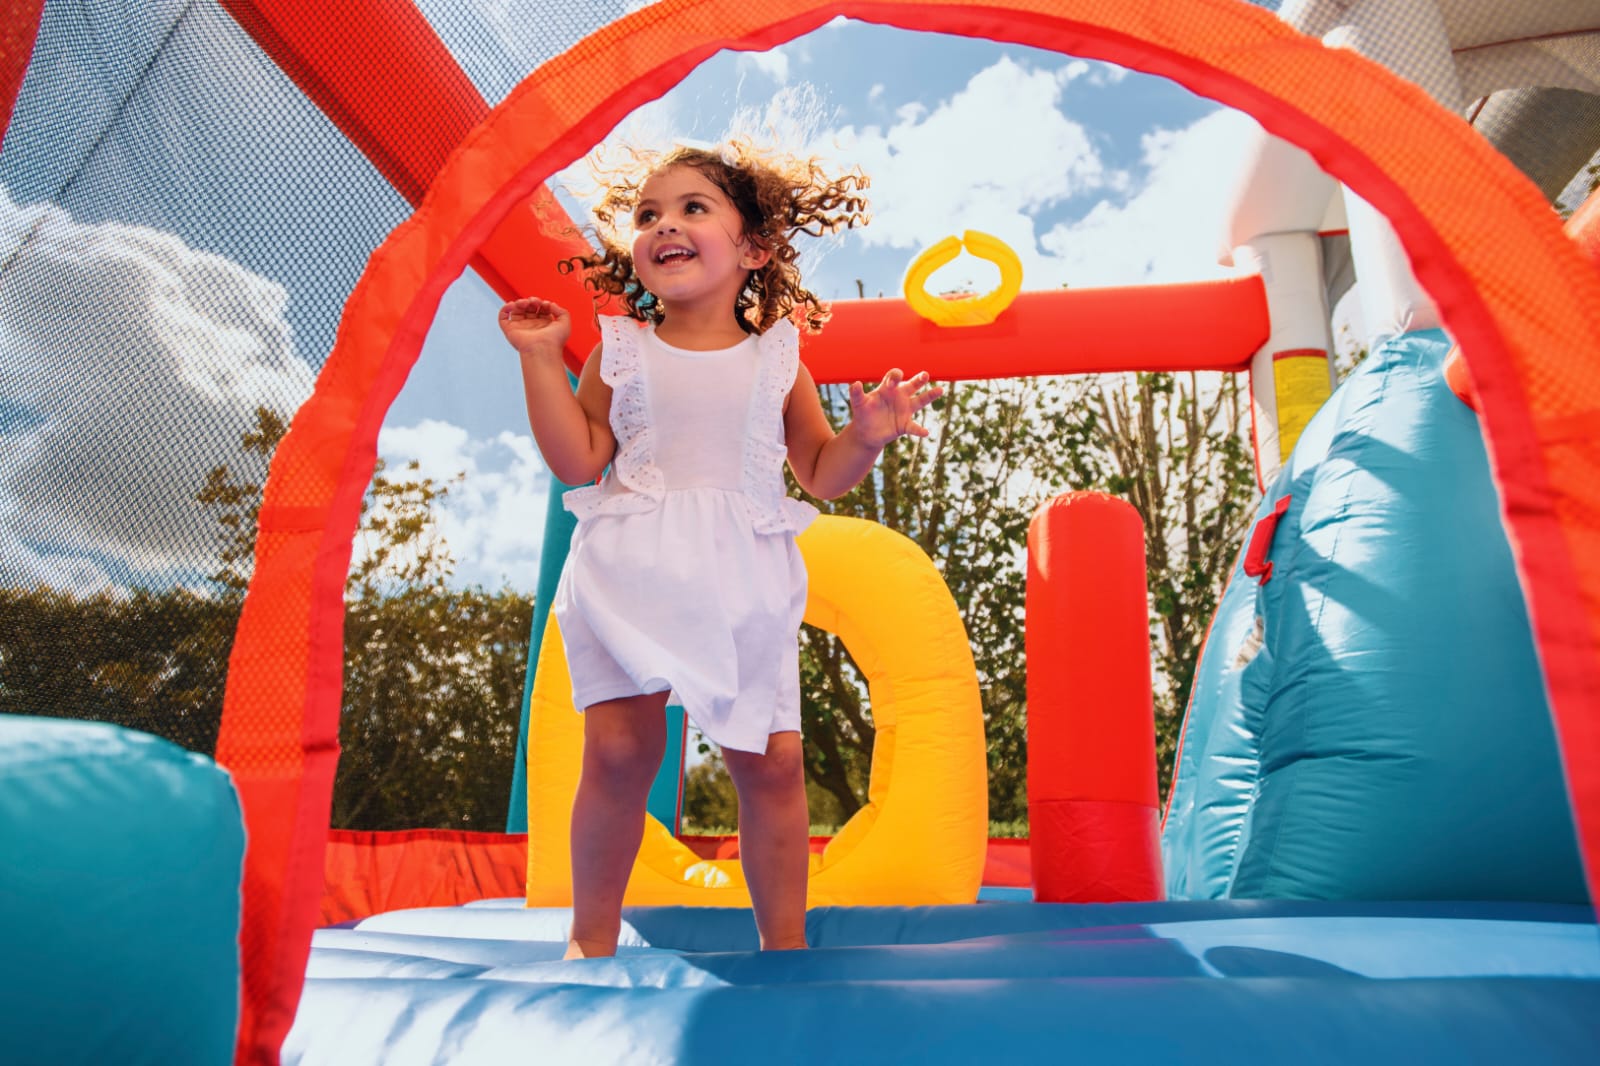 7 Things to Ensure Children are Safe in Bounce Houses